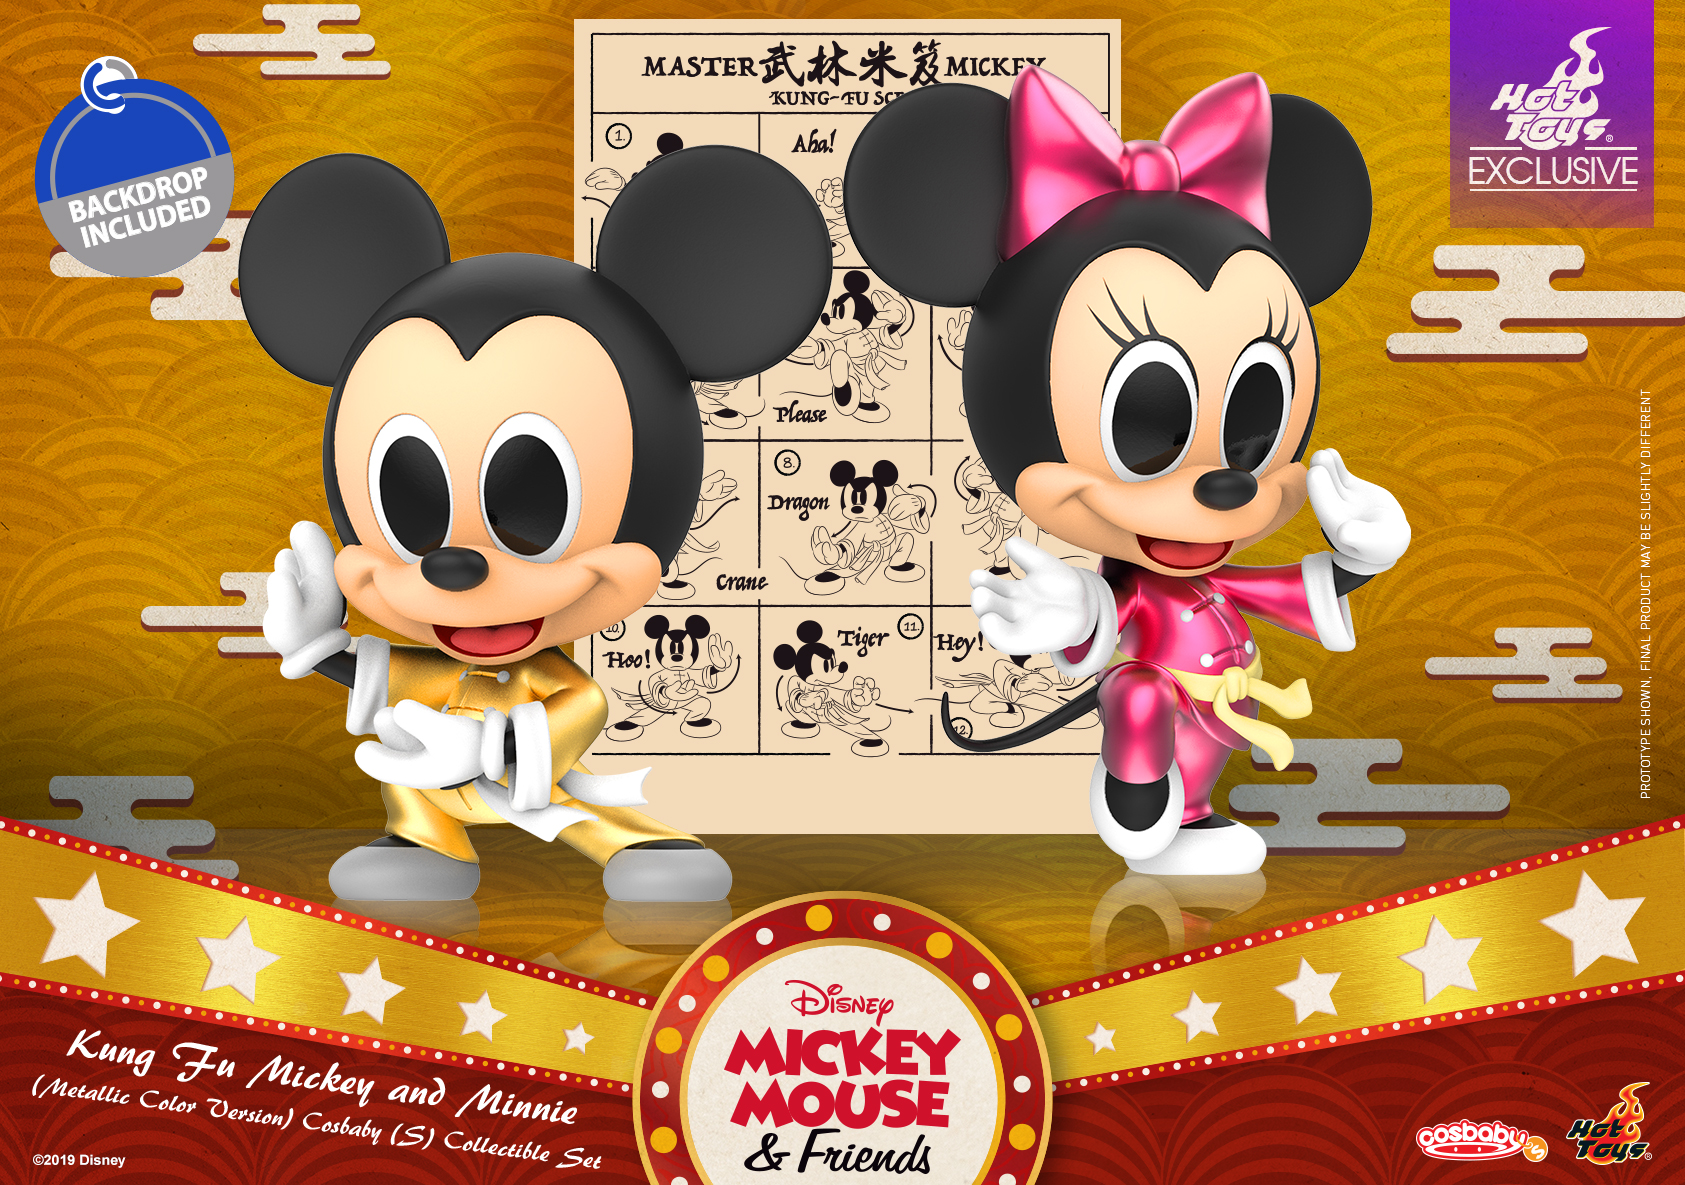 Hot Toys - Mickey Mouse and Friends - Kung Fu Mickey (Metallic Color) Cosbaby Set_PR2